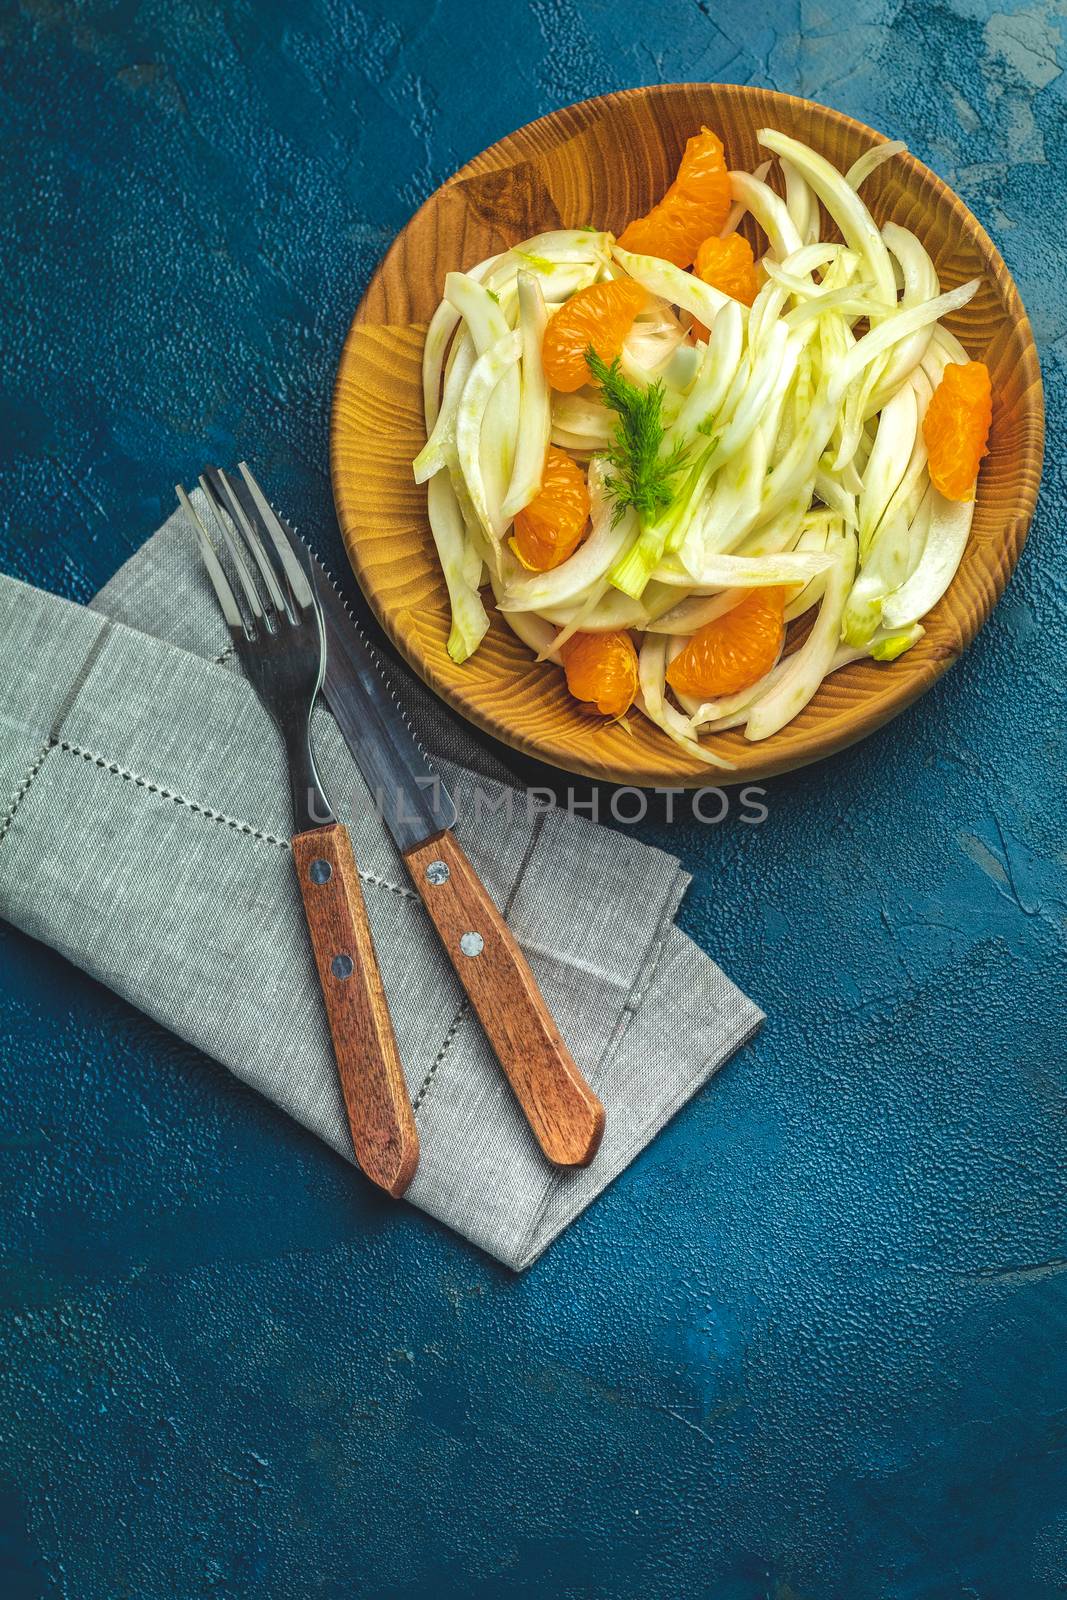 Traditional sicilian italian salad with fennel and tangerine. Fennel and orange citrus salad on wooden plate between ingredients on dark blue concrete table surface. Modern, light, raw, veg cuisine